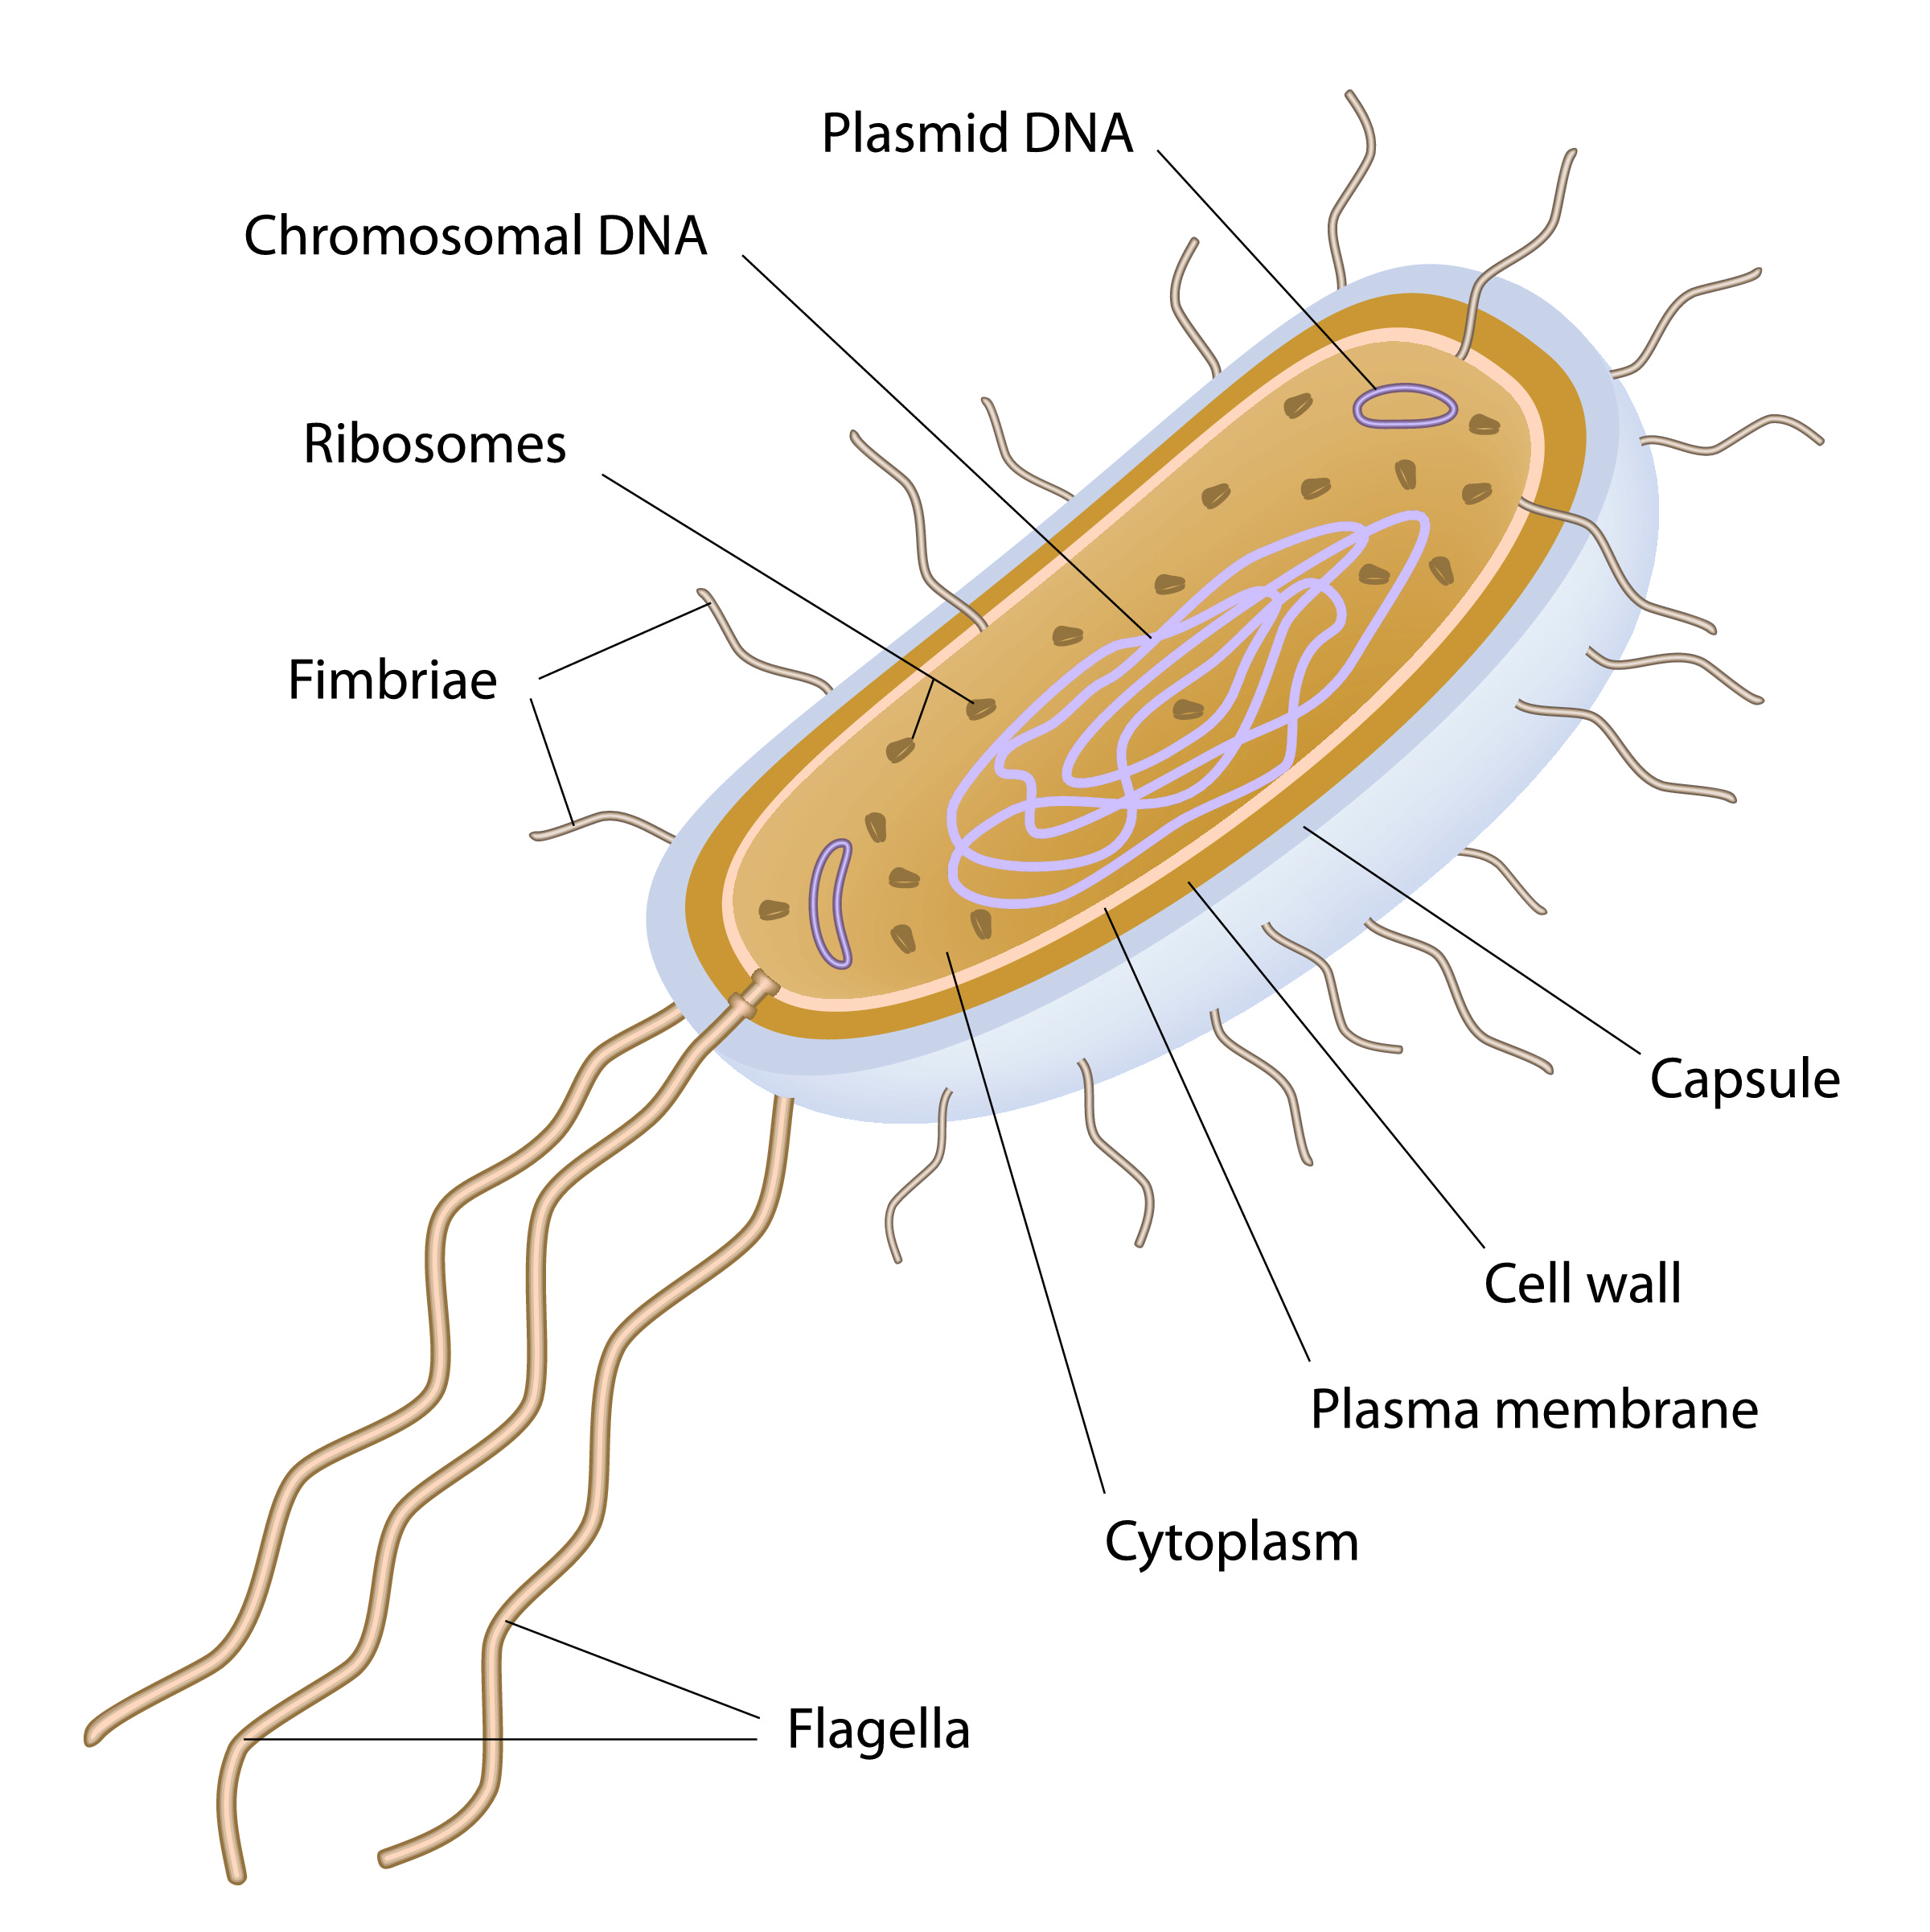 Image of bacterial cell